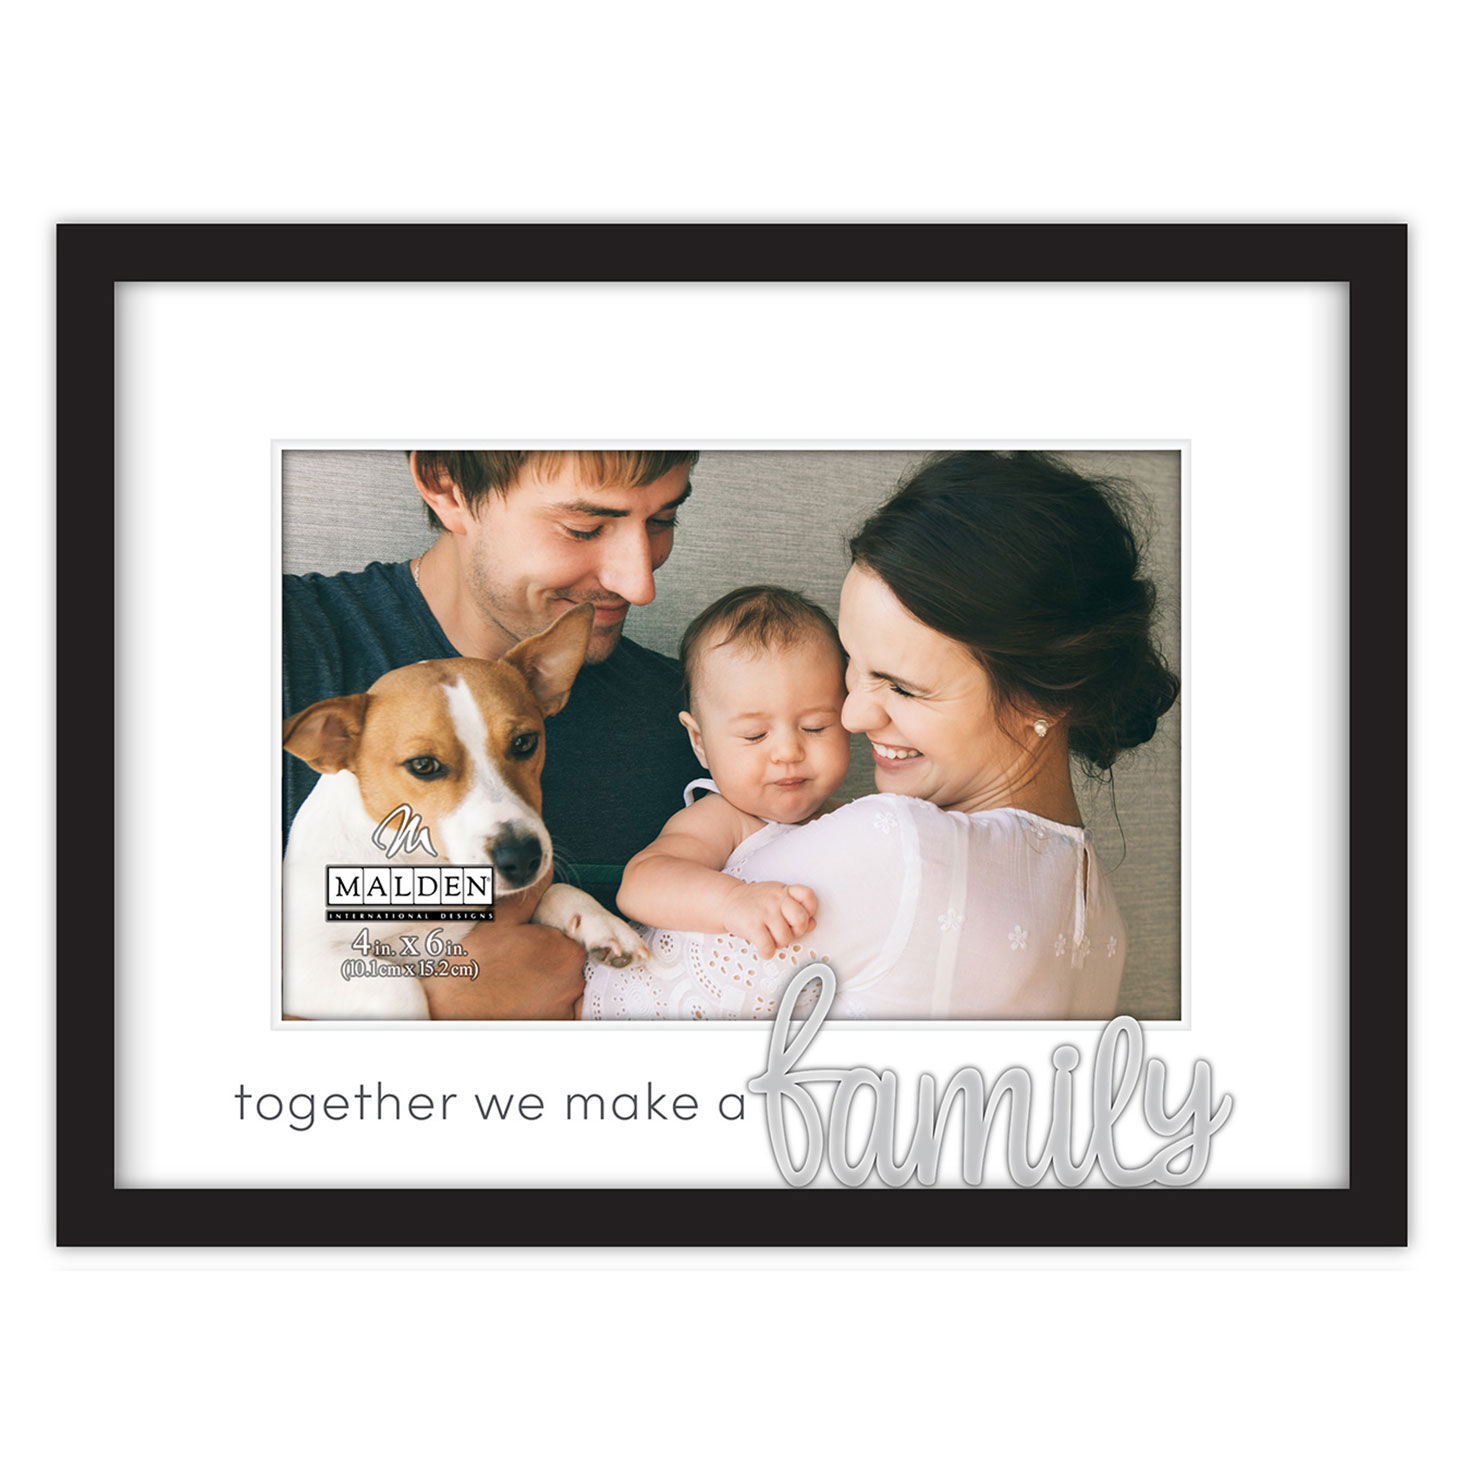 Malden Together We Make a Family Wood Picture Frame, 4x6 for only USD 17.99 | Hallmark